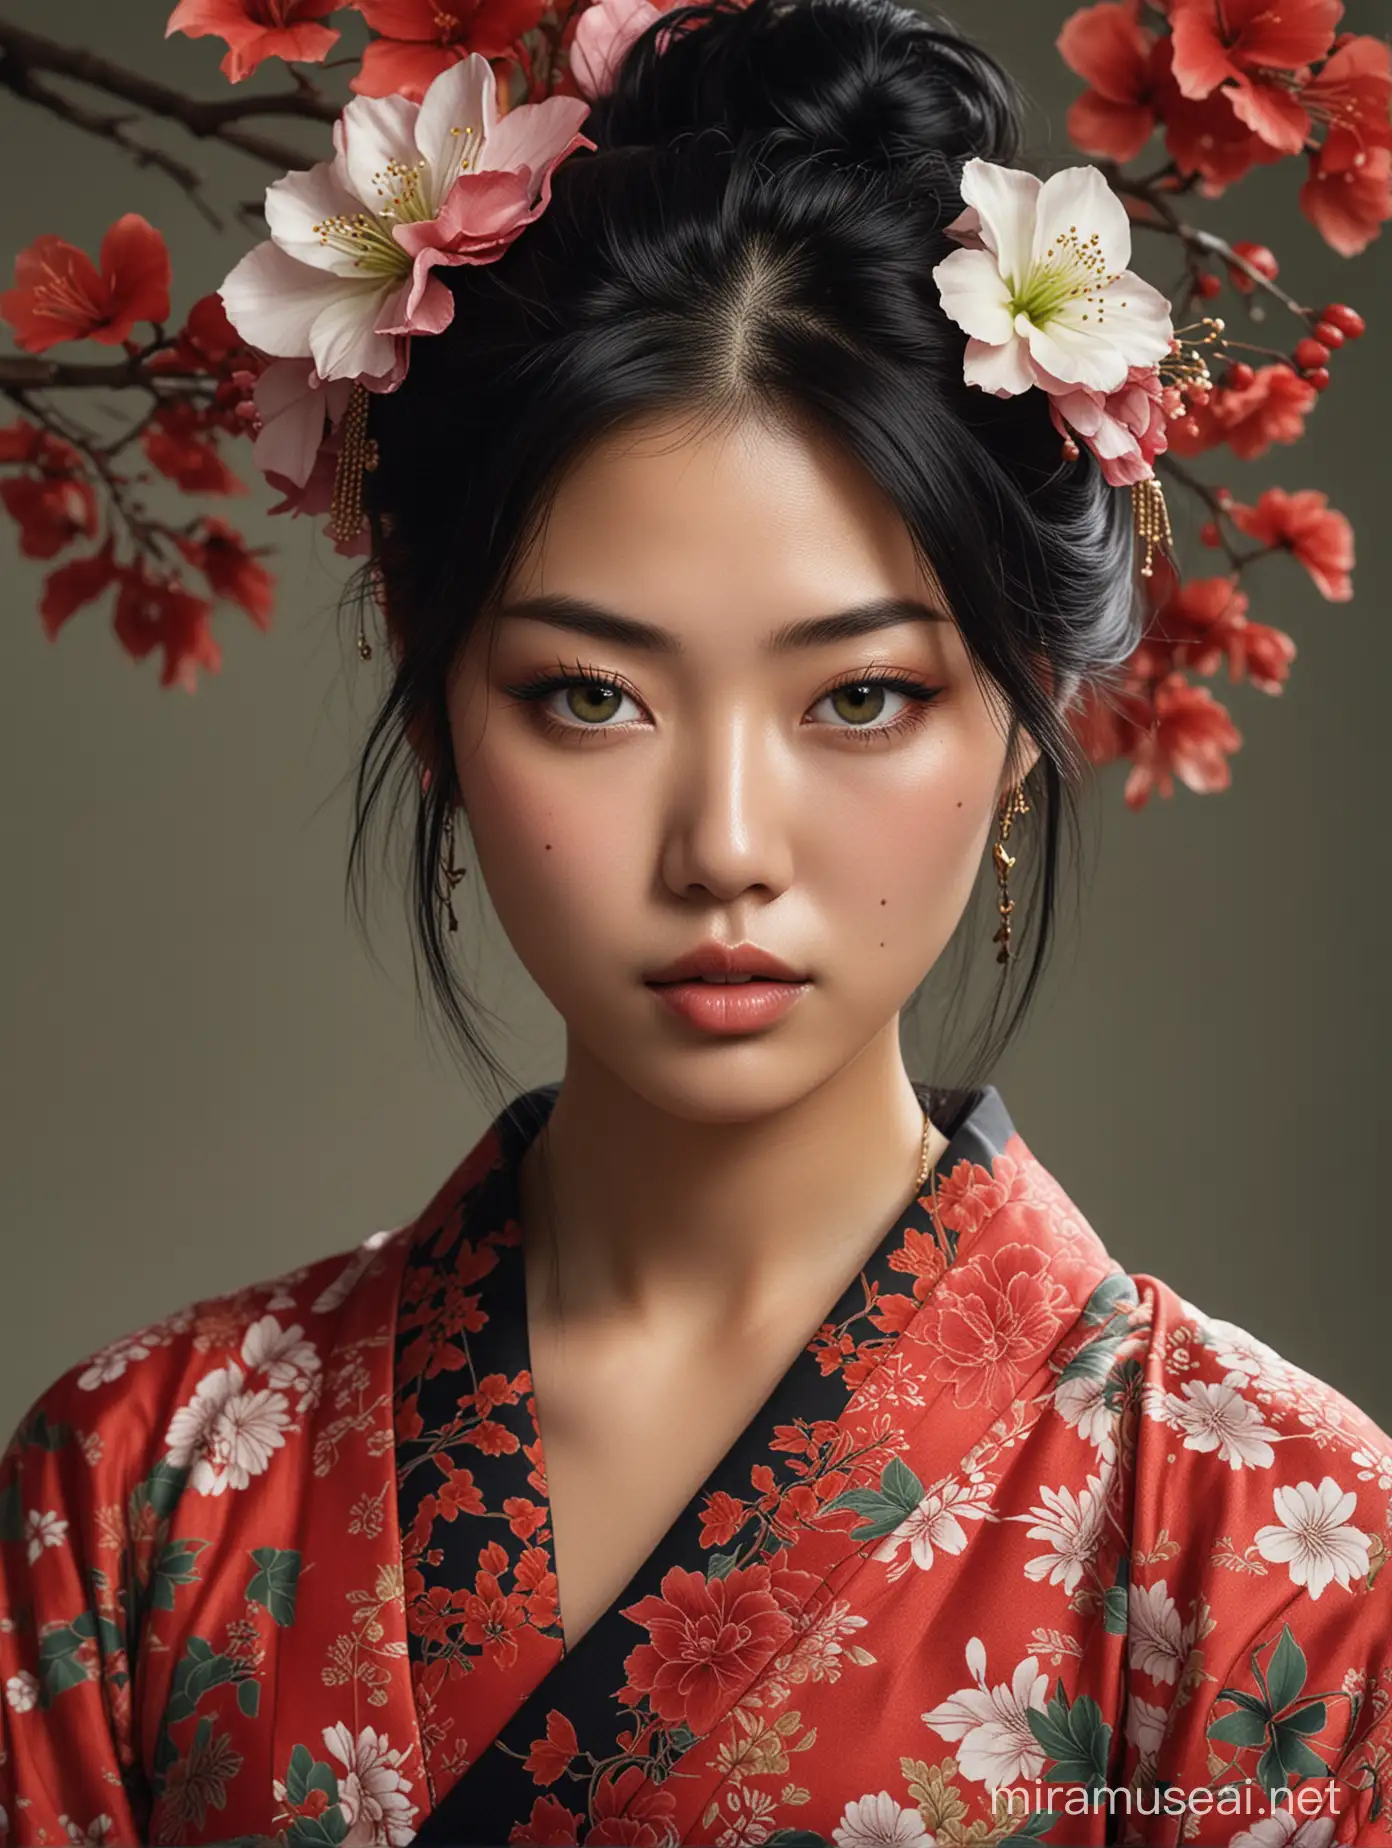 Create the highest detailed photorealistic digital portrait of a young, beautiful and bold woman, who is 20% Korean and Japanese. He has piercing green eyes, a nose ring, and striking facial tattoos. Her black hair, dyed with hints of green, was styled in a messy, carefree manner, partially covering her face. She wears a red kimono decorated with white floral patterns, contrasting with her skin decorated with elegant, monochromatic tattoos. The kimono was draped casually, revealing a delicate gold chain around her neck. The background is a simple, soft-focus texture that highlights the sharpness of her features and the vivid colors of her clothes. His expression was calm yet powerful, captivating the audience.